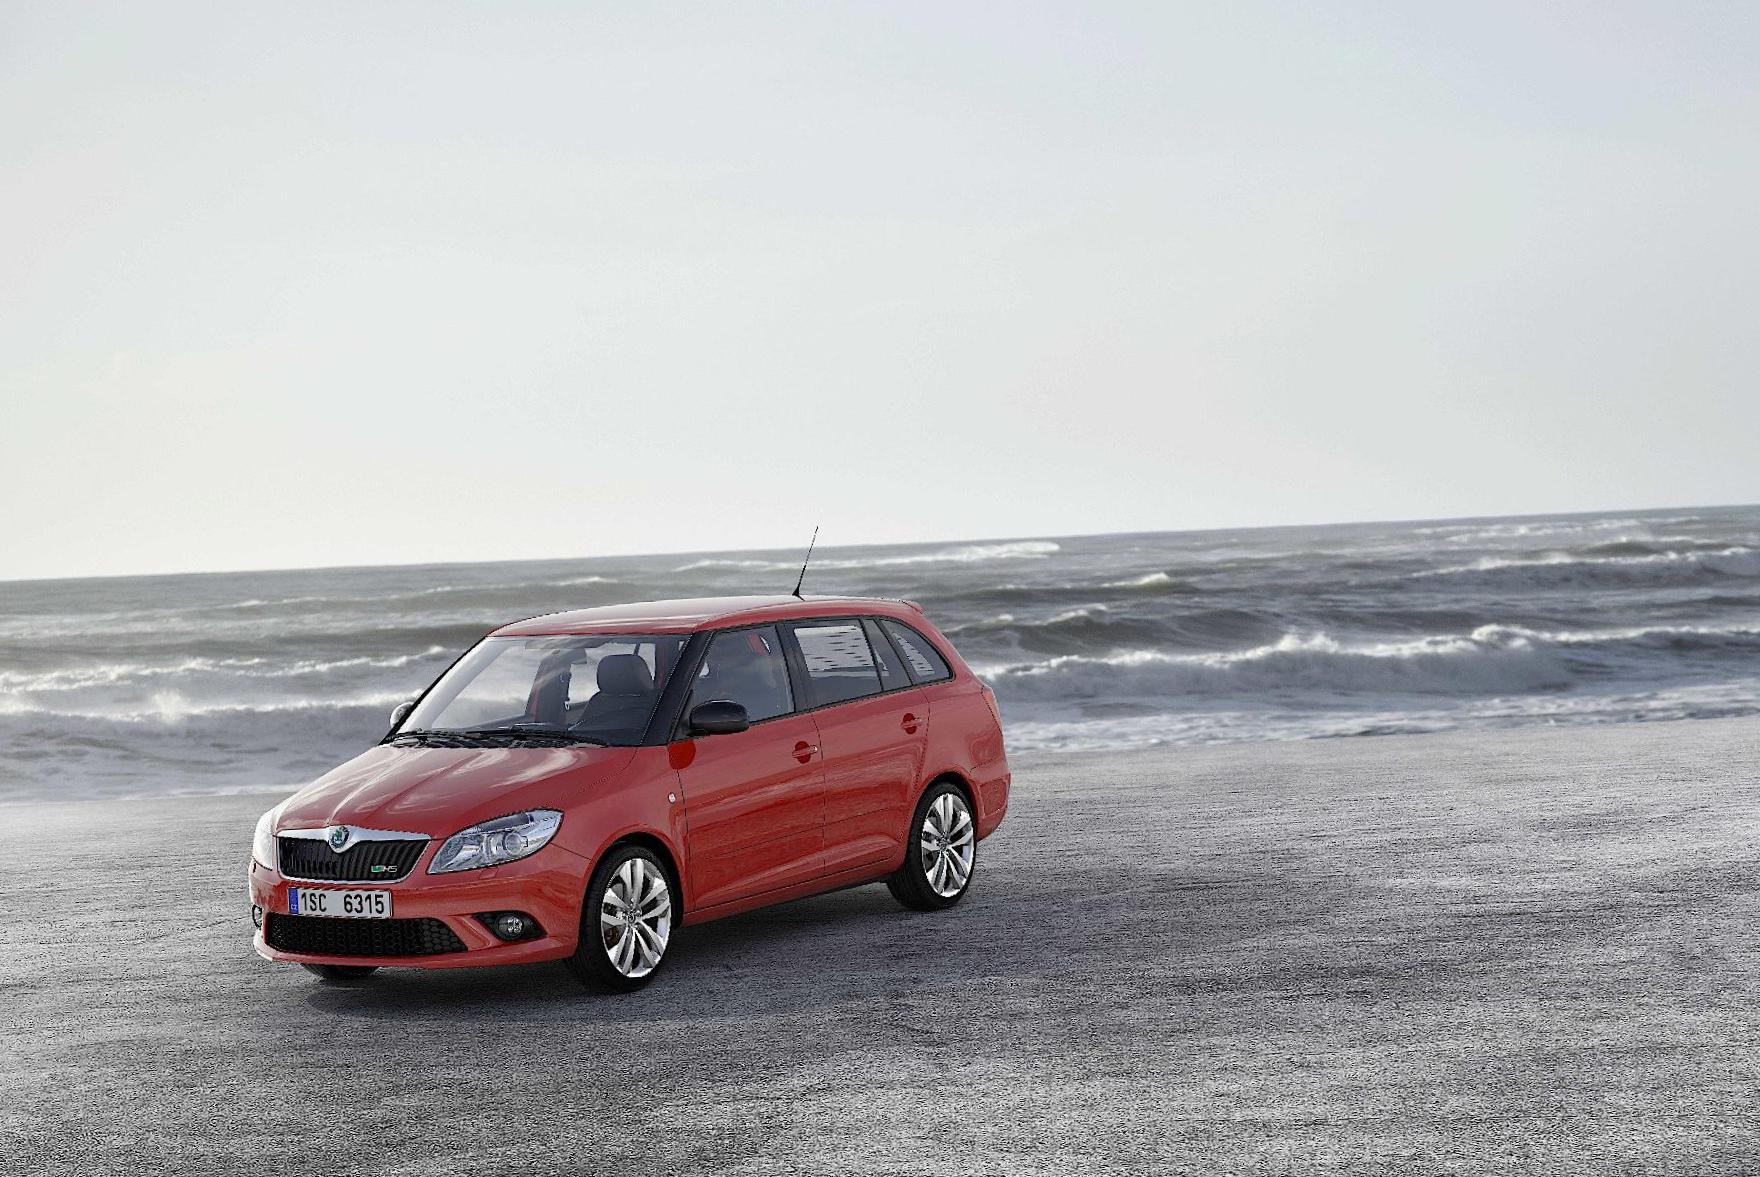 Fabia Combi RS Skoda approved wagon